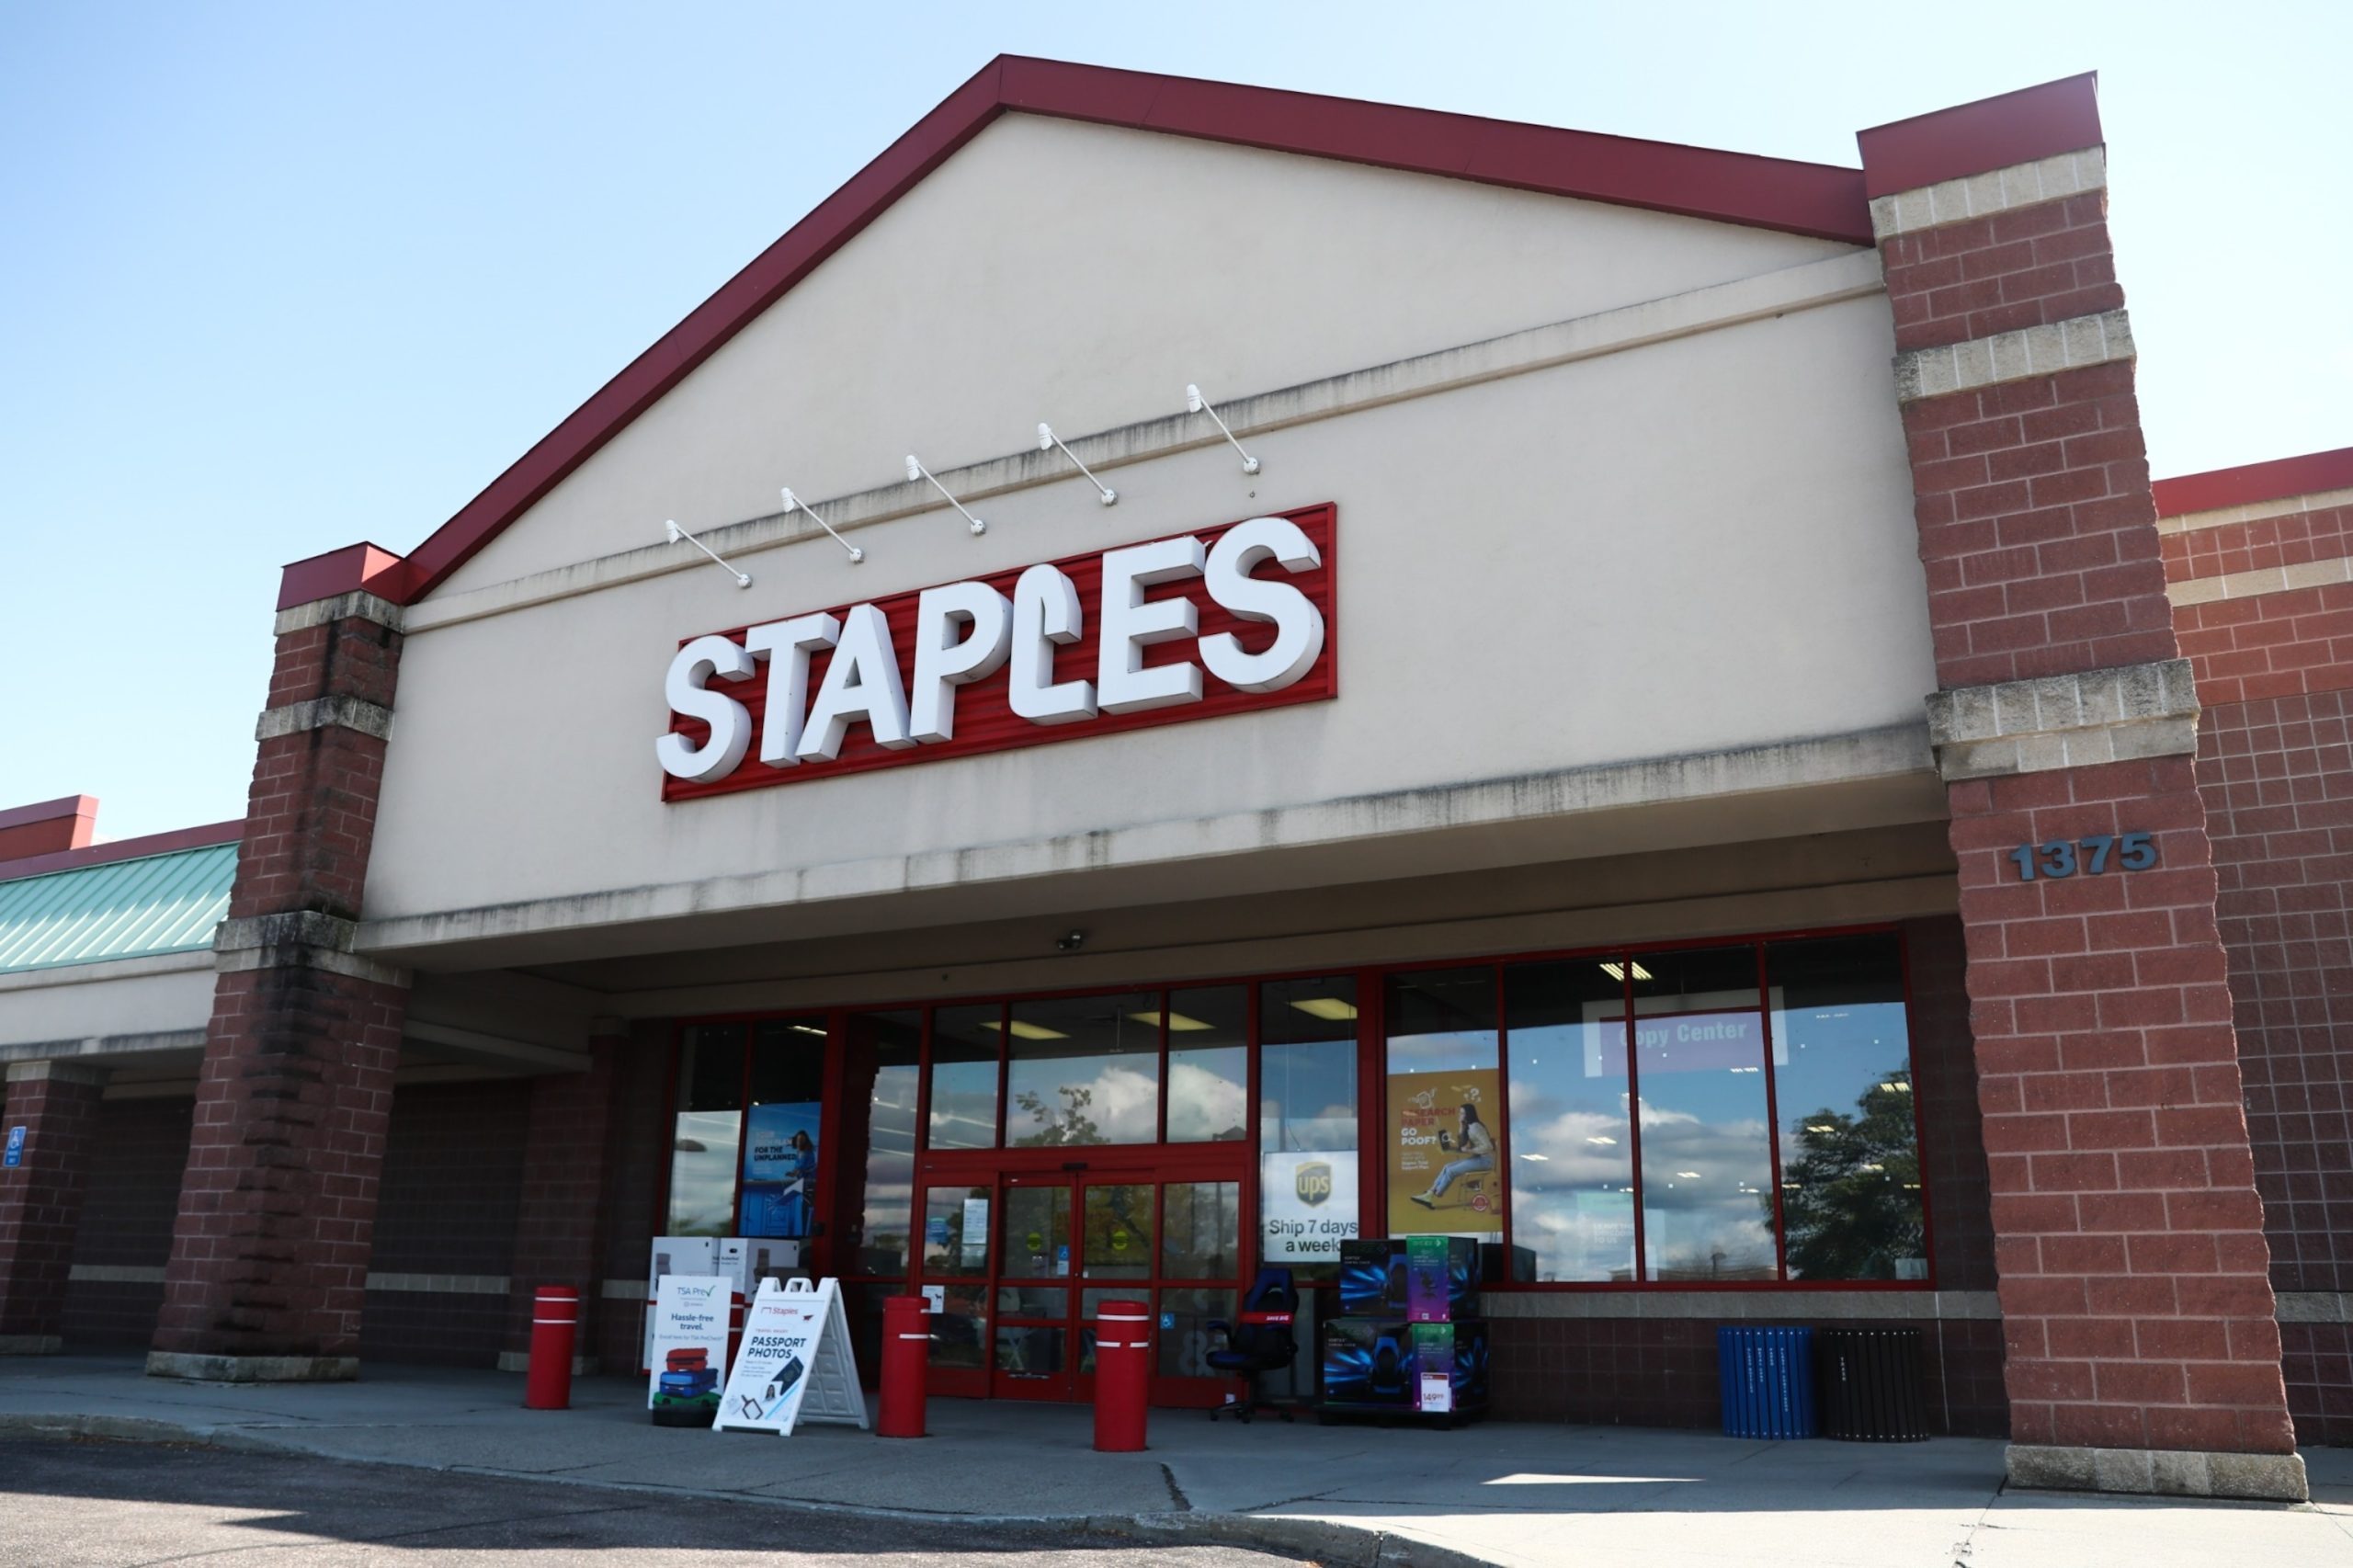 Staples Online Ordering Experiences Temporary Disruption Due to Cyberattack